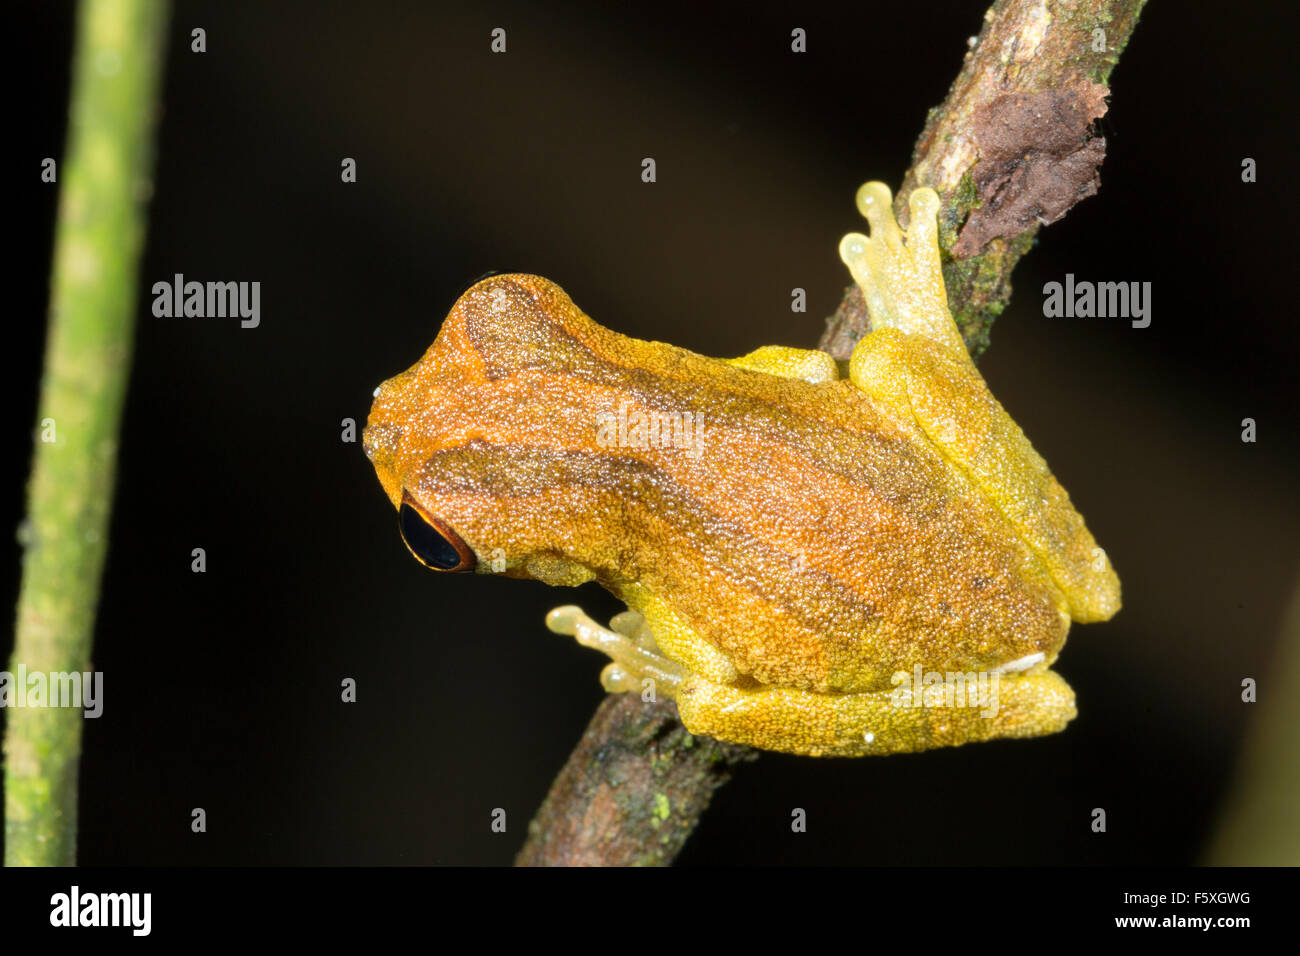 Short-headed treefrog (Dendropsophus parviceps) on a twig in the rainforest, Ecuador Stock Photo